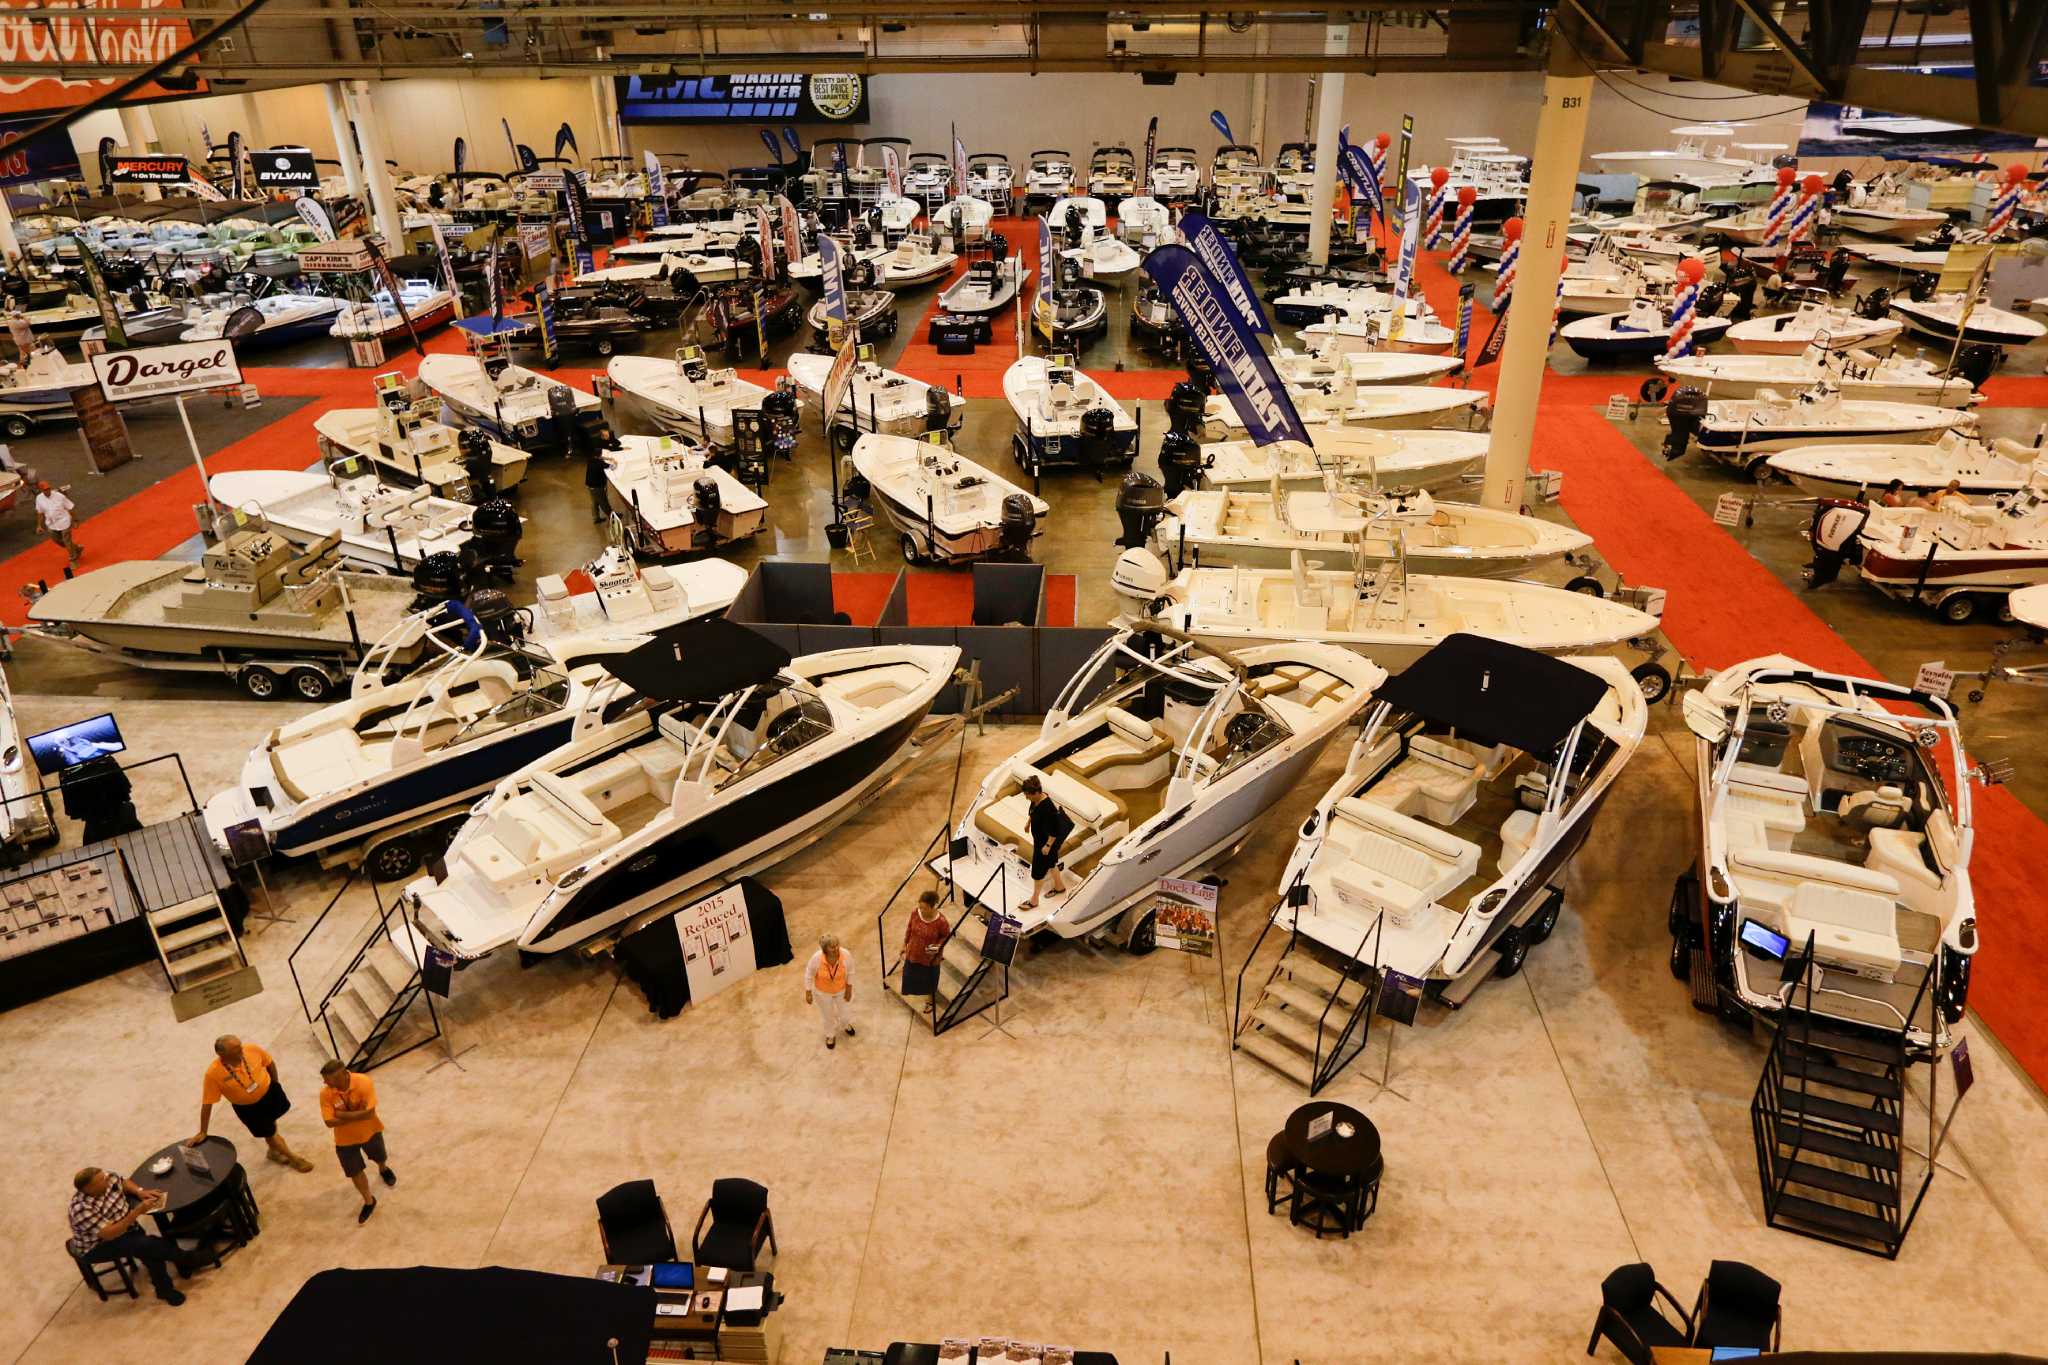 Houston Boat Show is that, plus a whole lot more